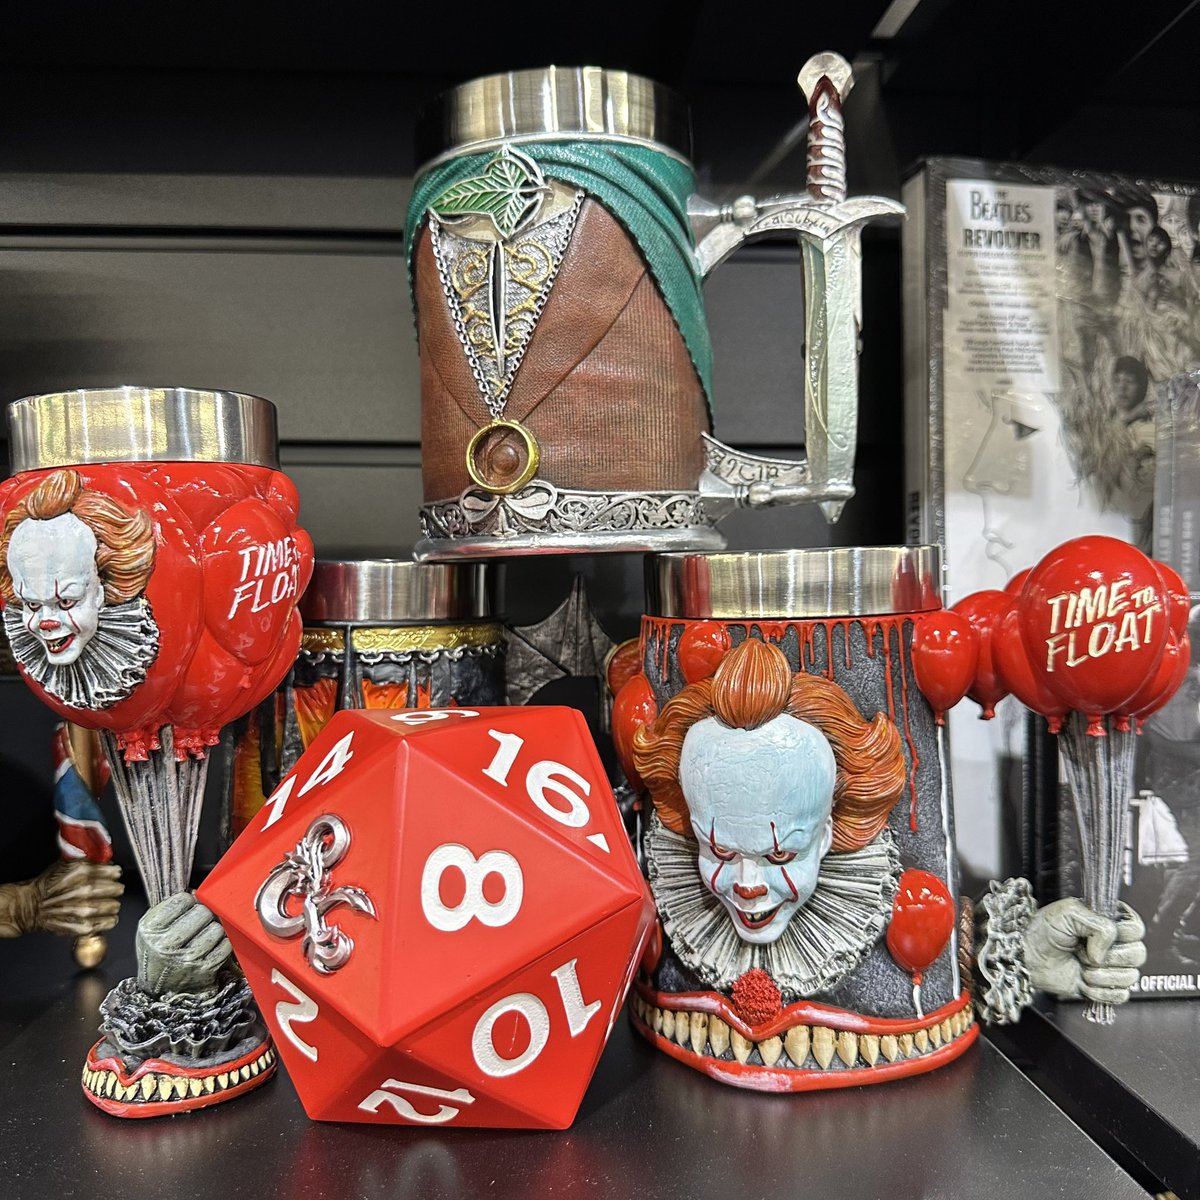 Cheers! Our tankards and goblets are on display and new in! 🎈 #it #metallica #ironmaiden #motorhead #dungeonsanddragons #acdc #lordoftherings #thehobbit #pennywise #nemesisnow